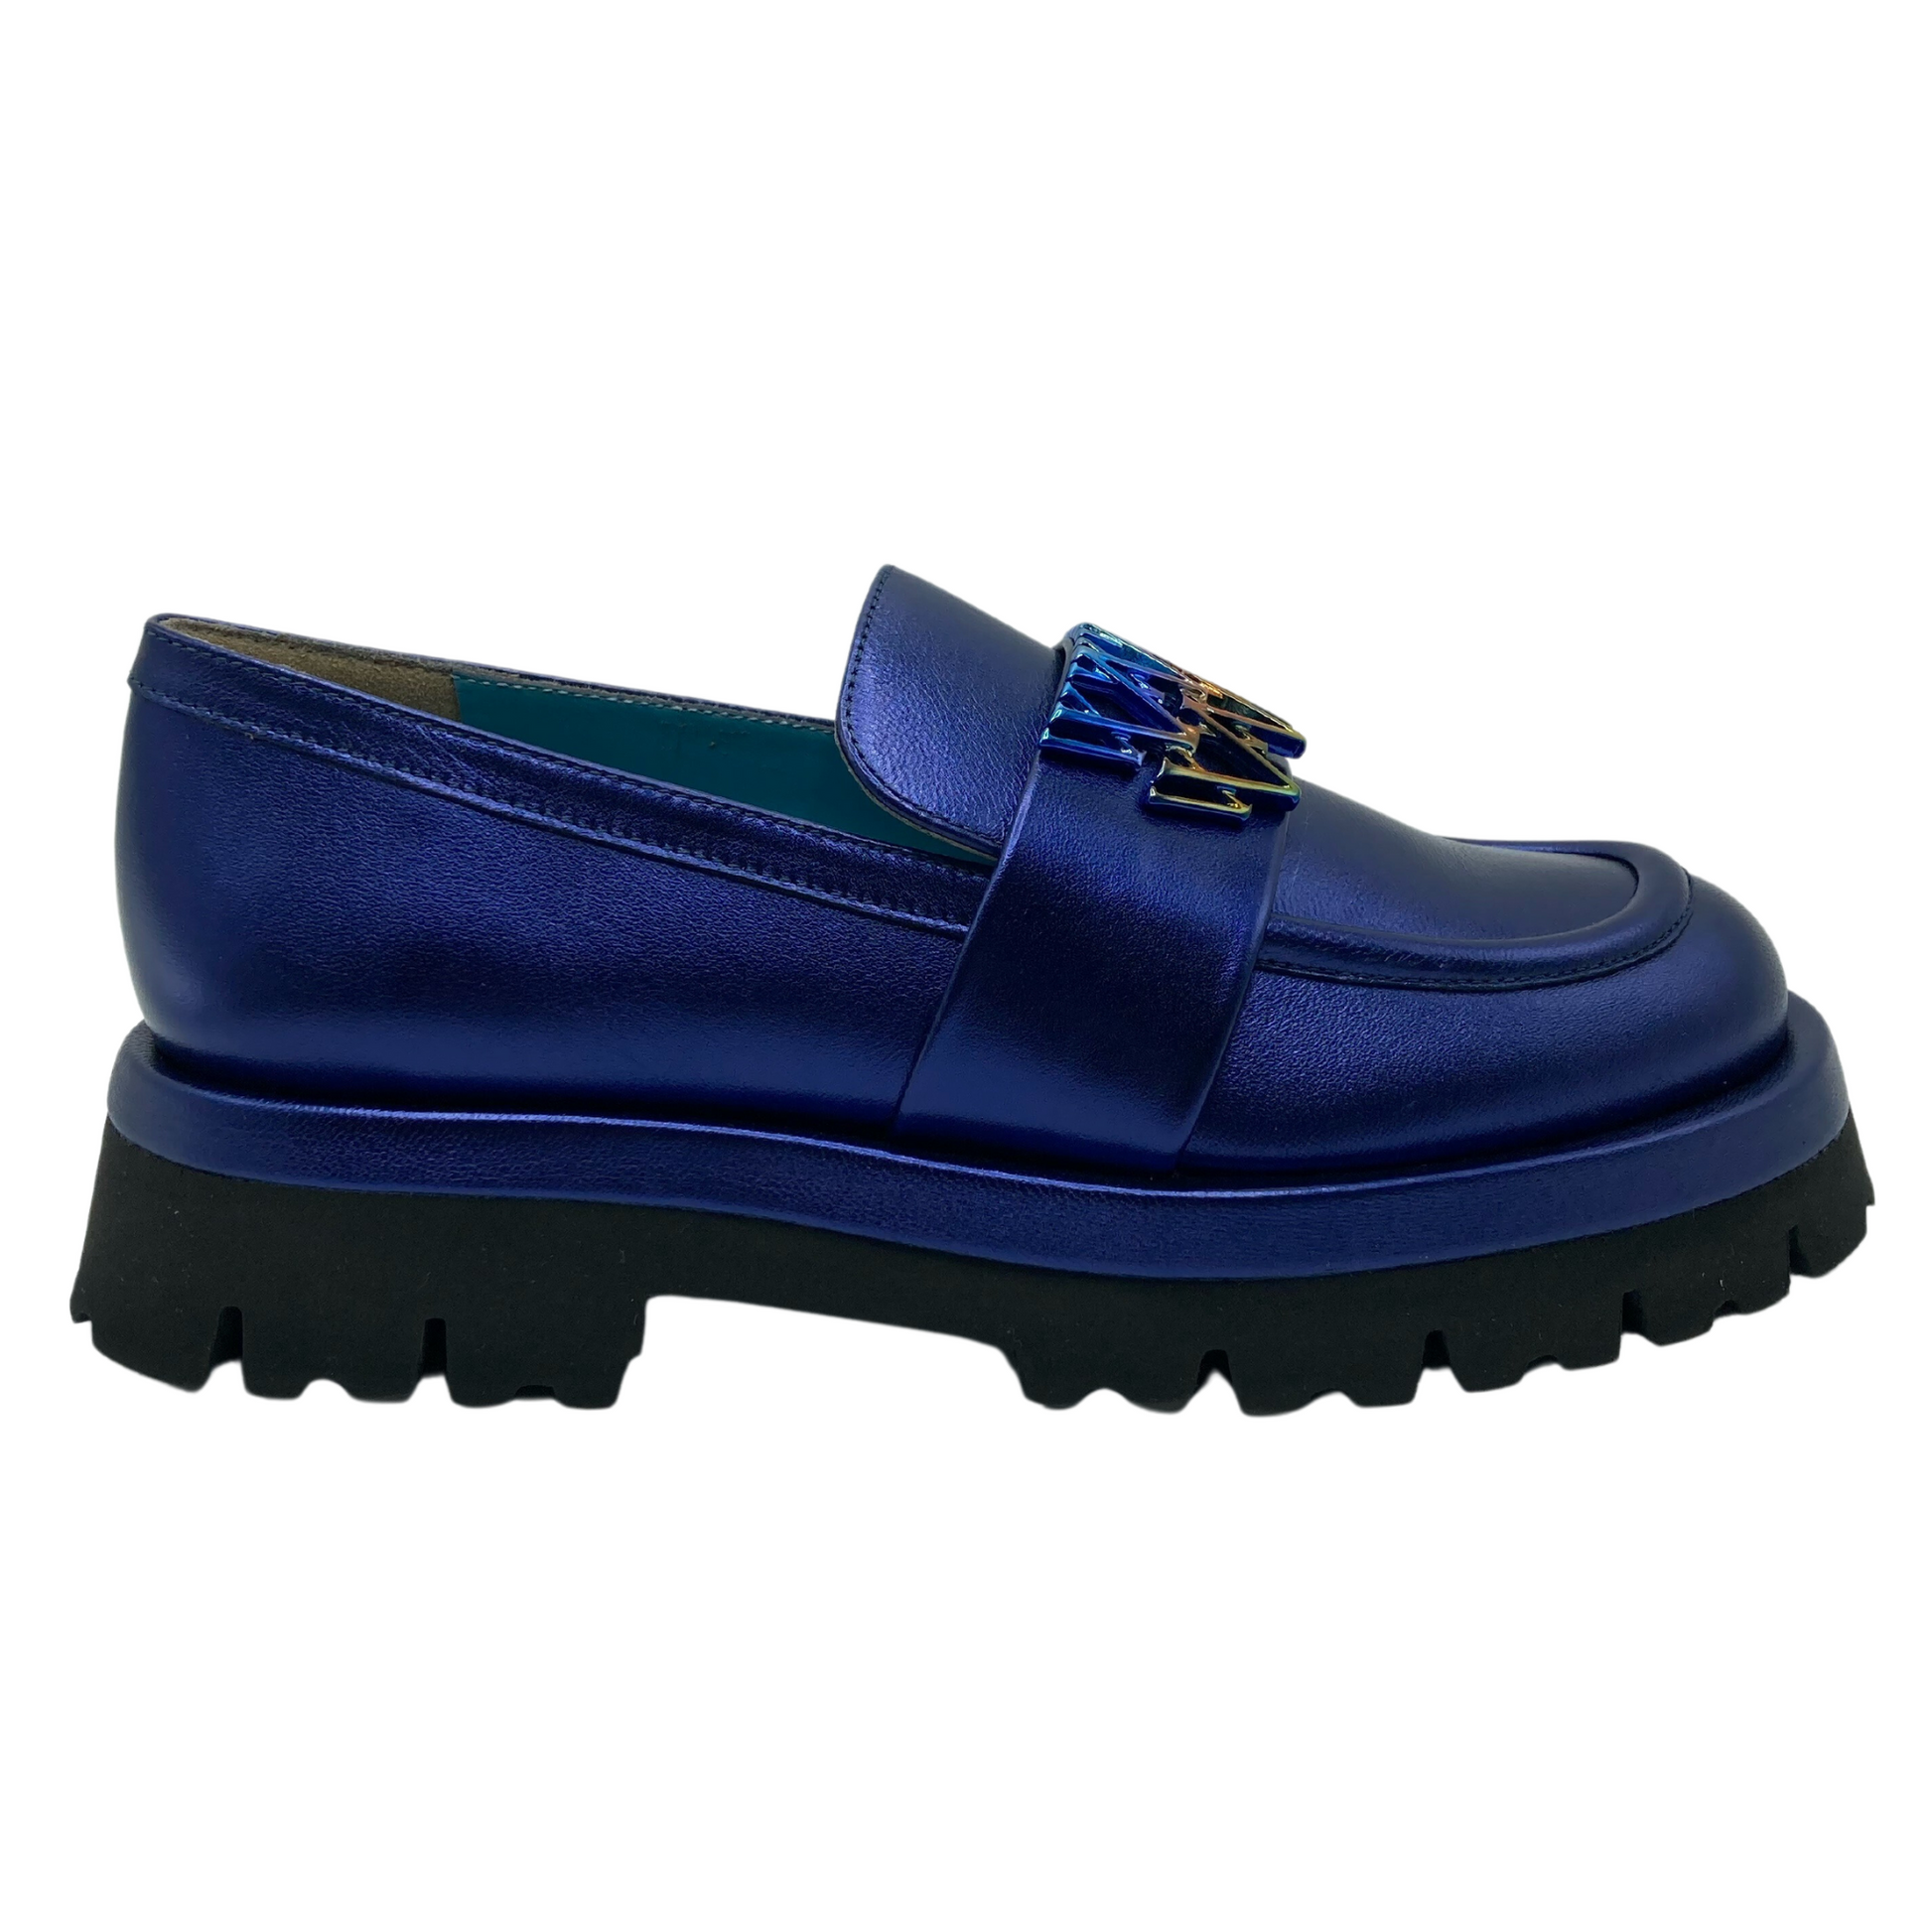 Right facing view of platform blue leather loafer with multicoloured detail on the upper